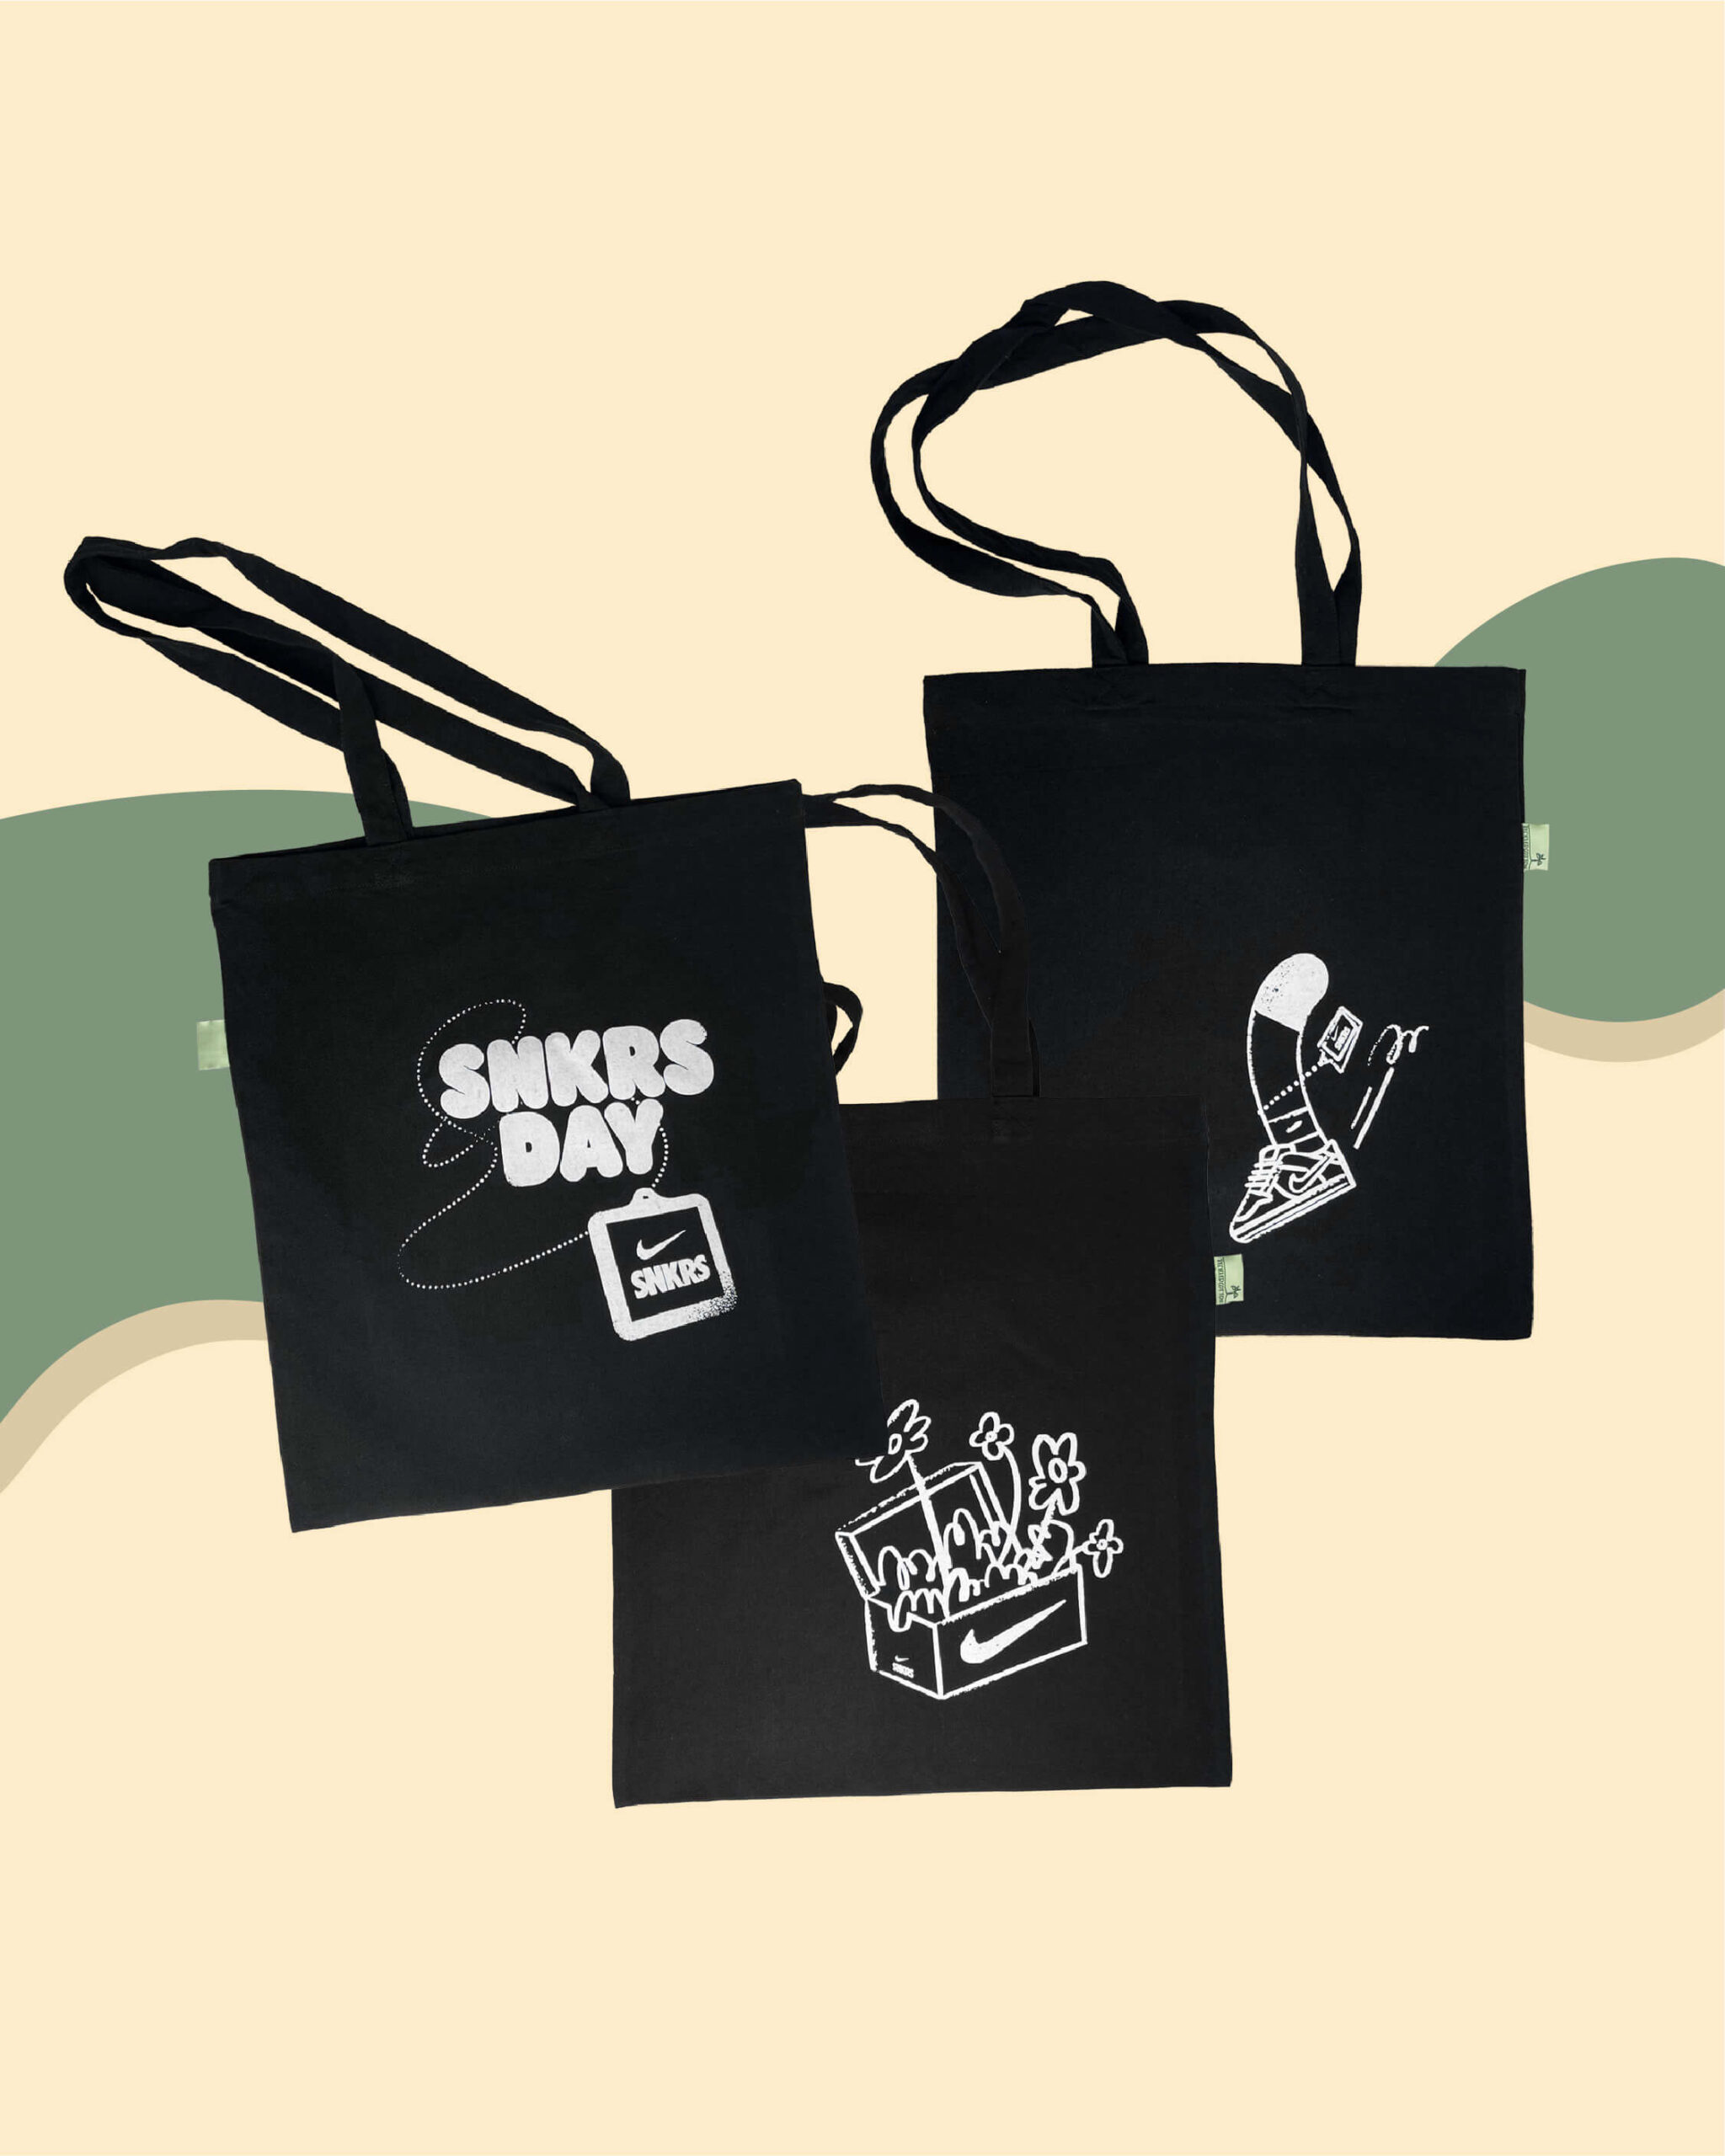 nike-snkrs-day-branded-event-totes-by-project-merchandise